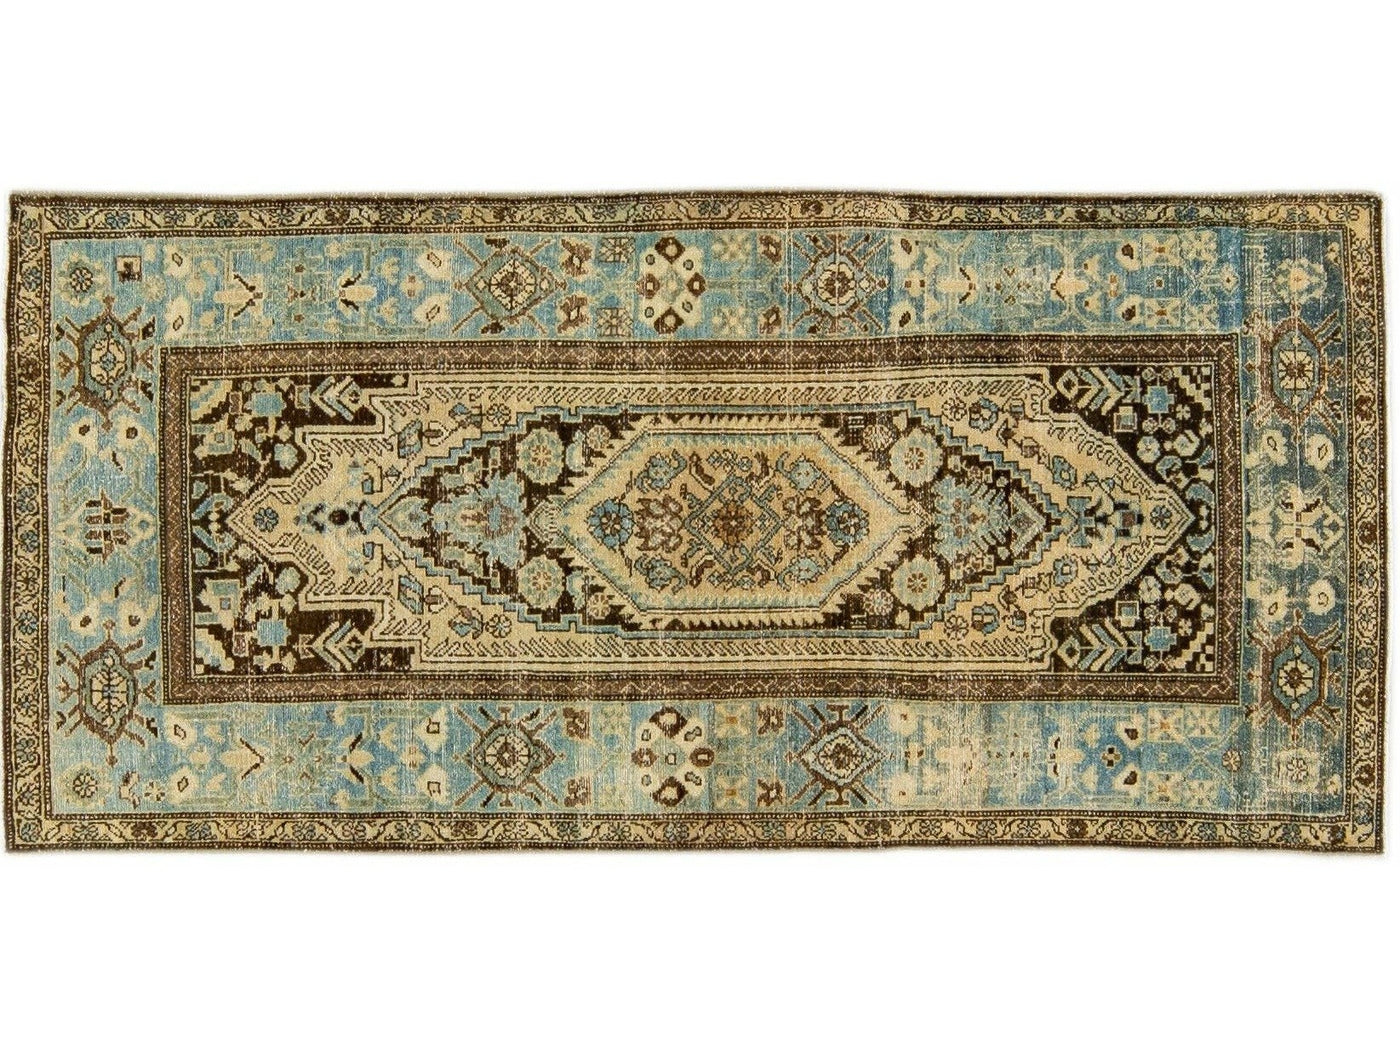 Antique Malayer Handmade Allover Designed Beige And Blue Wool Rug